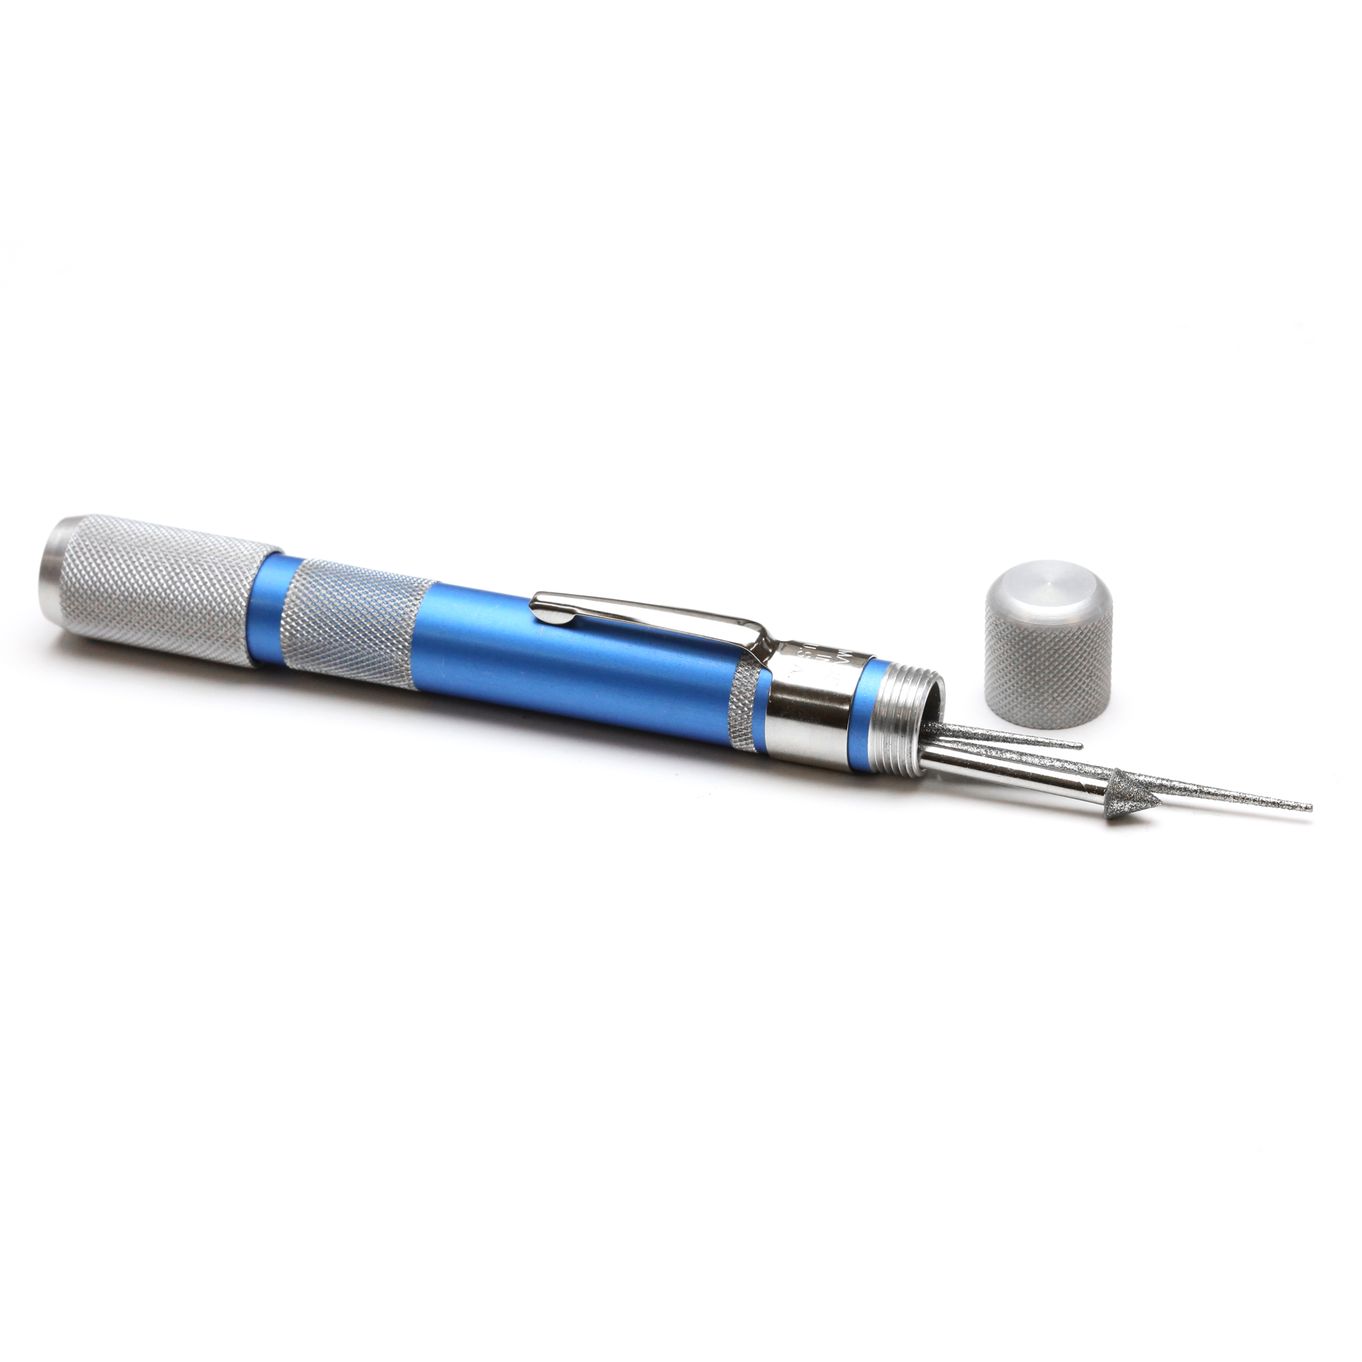  The Beadsmith Deluxe Diamond Coated Bead Reamer w/ 3  Interchangeable Tips & Aluminum Storage Handle, for Opening & Enlarging  Holes & Smoothing Edges